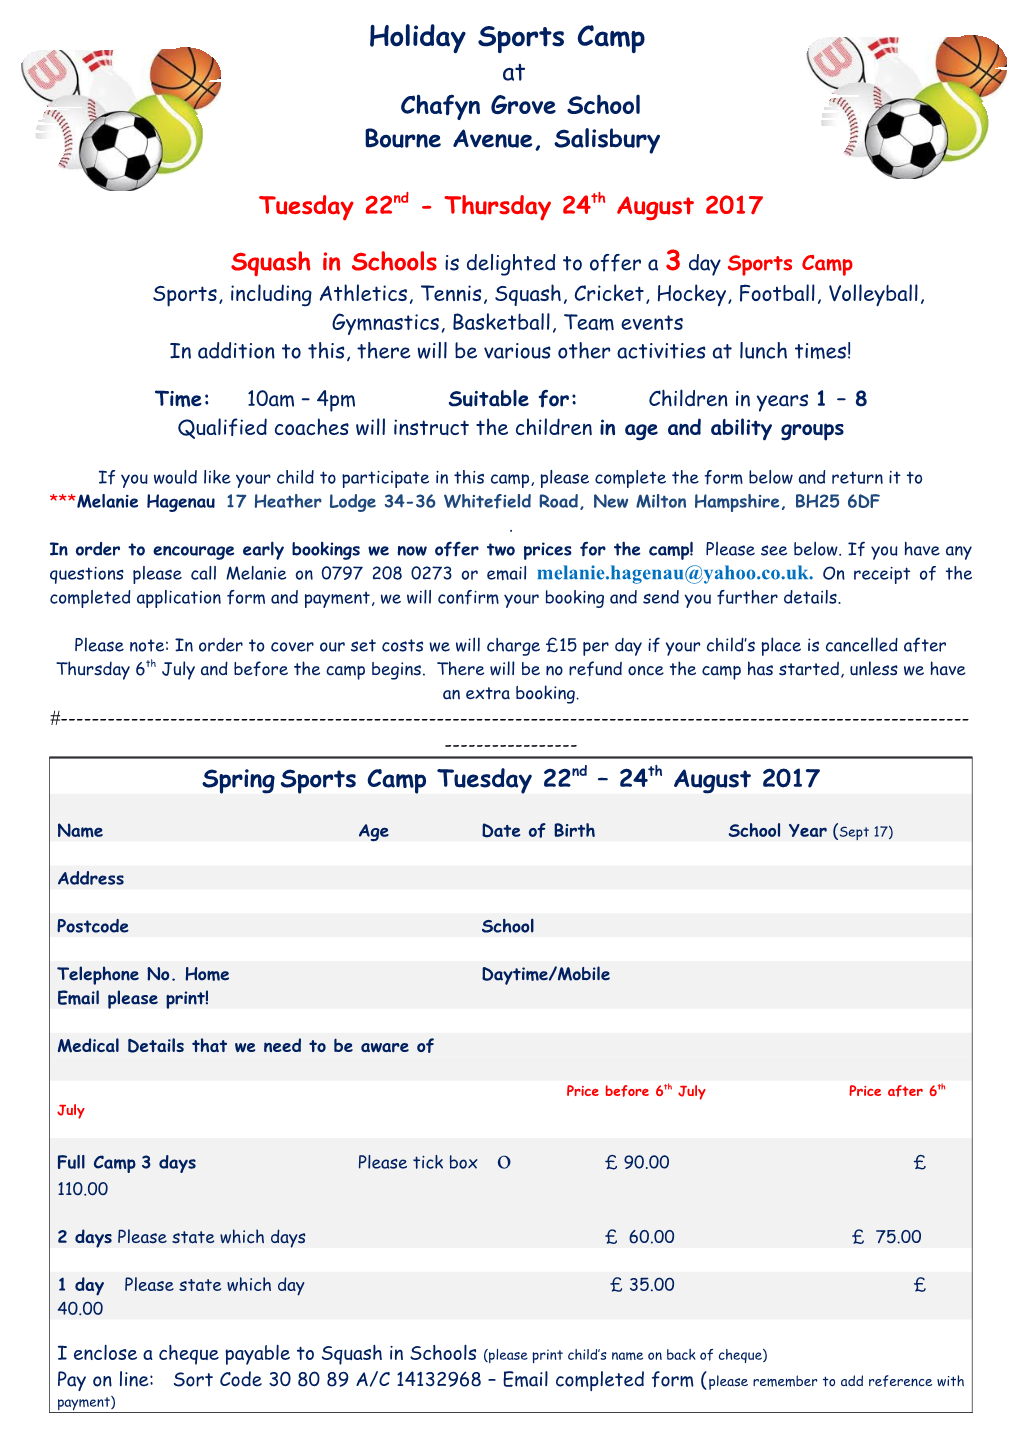 Squash in Schools Is Delighted to Offer a 3 Day Sports Camp